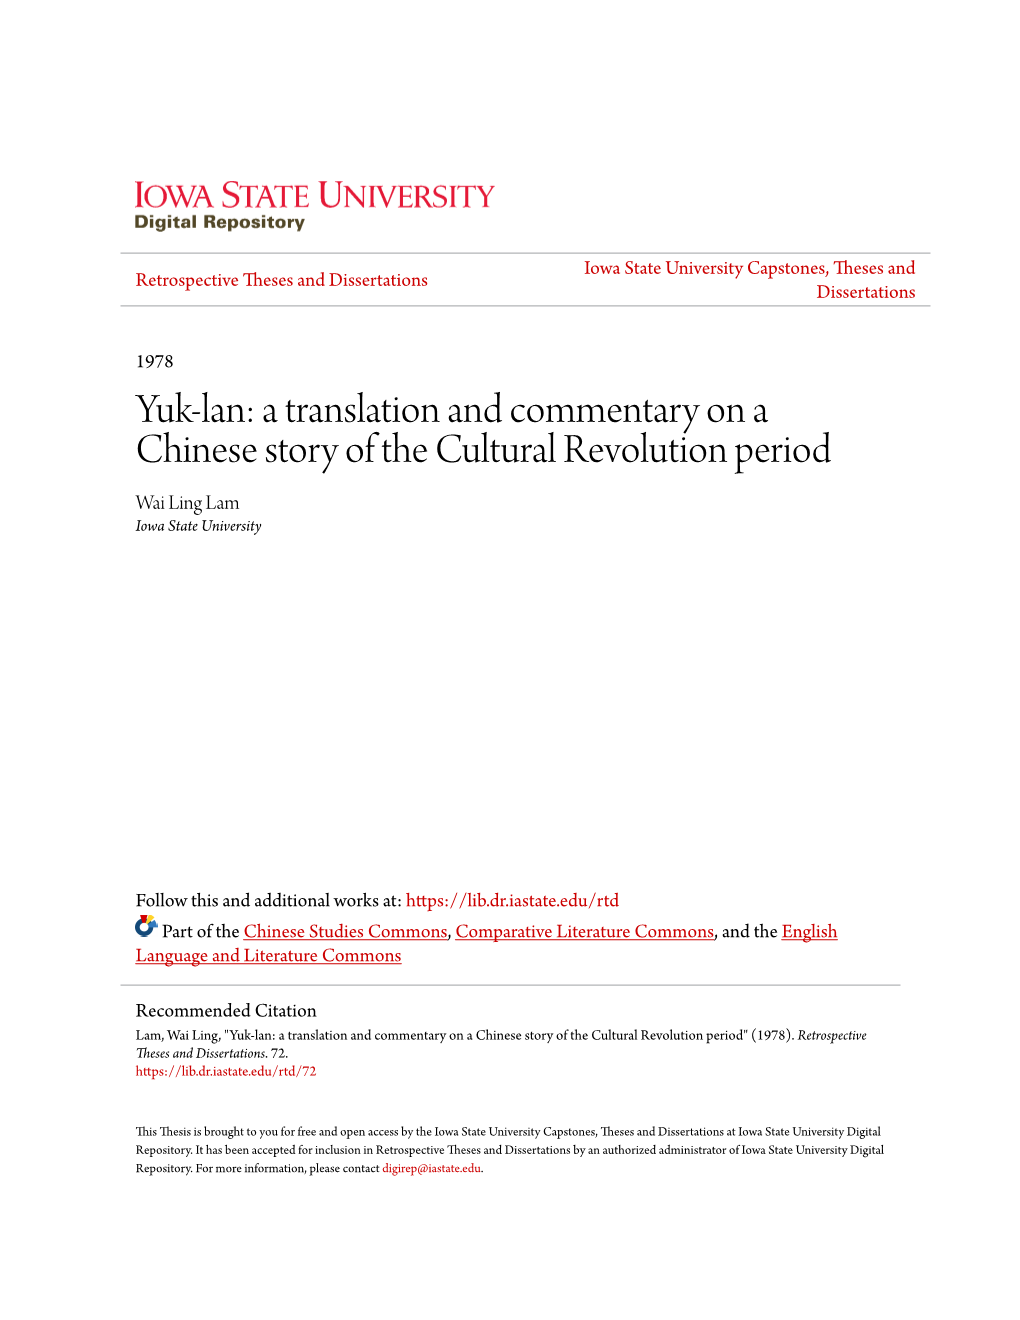 Yuk-Lan: a Translation and Commentary on a Chinese Story of the Cultural Revolution Period Wai Ling Lam Iowa State University